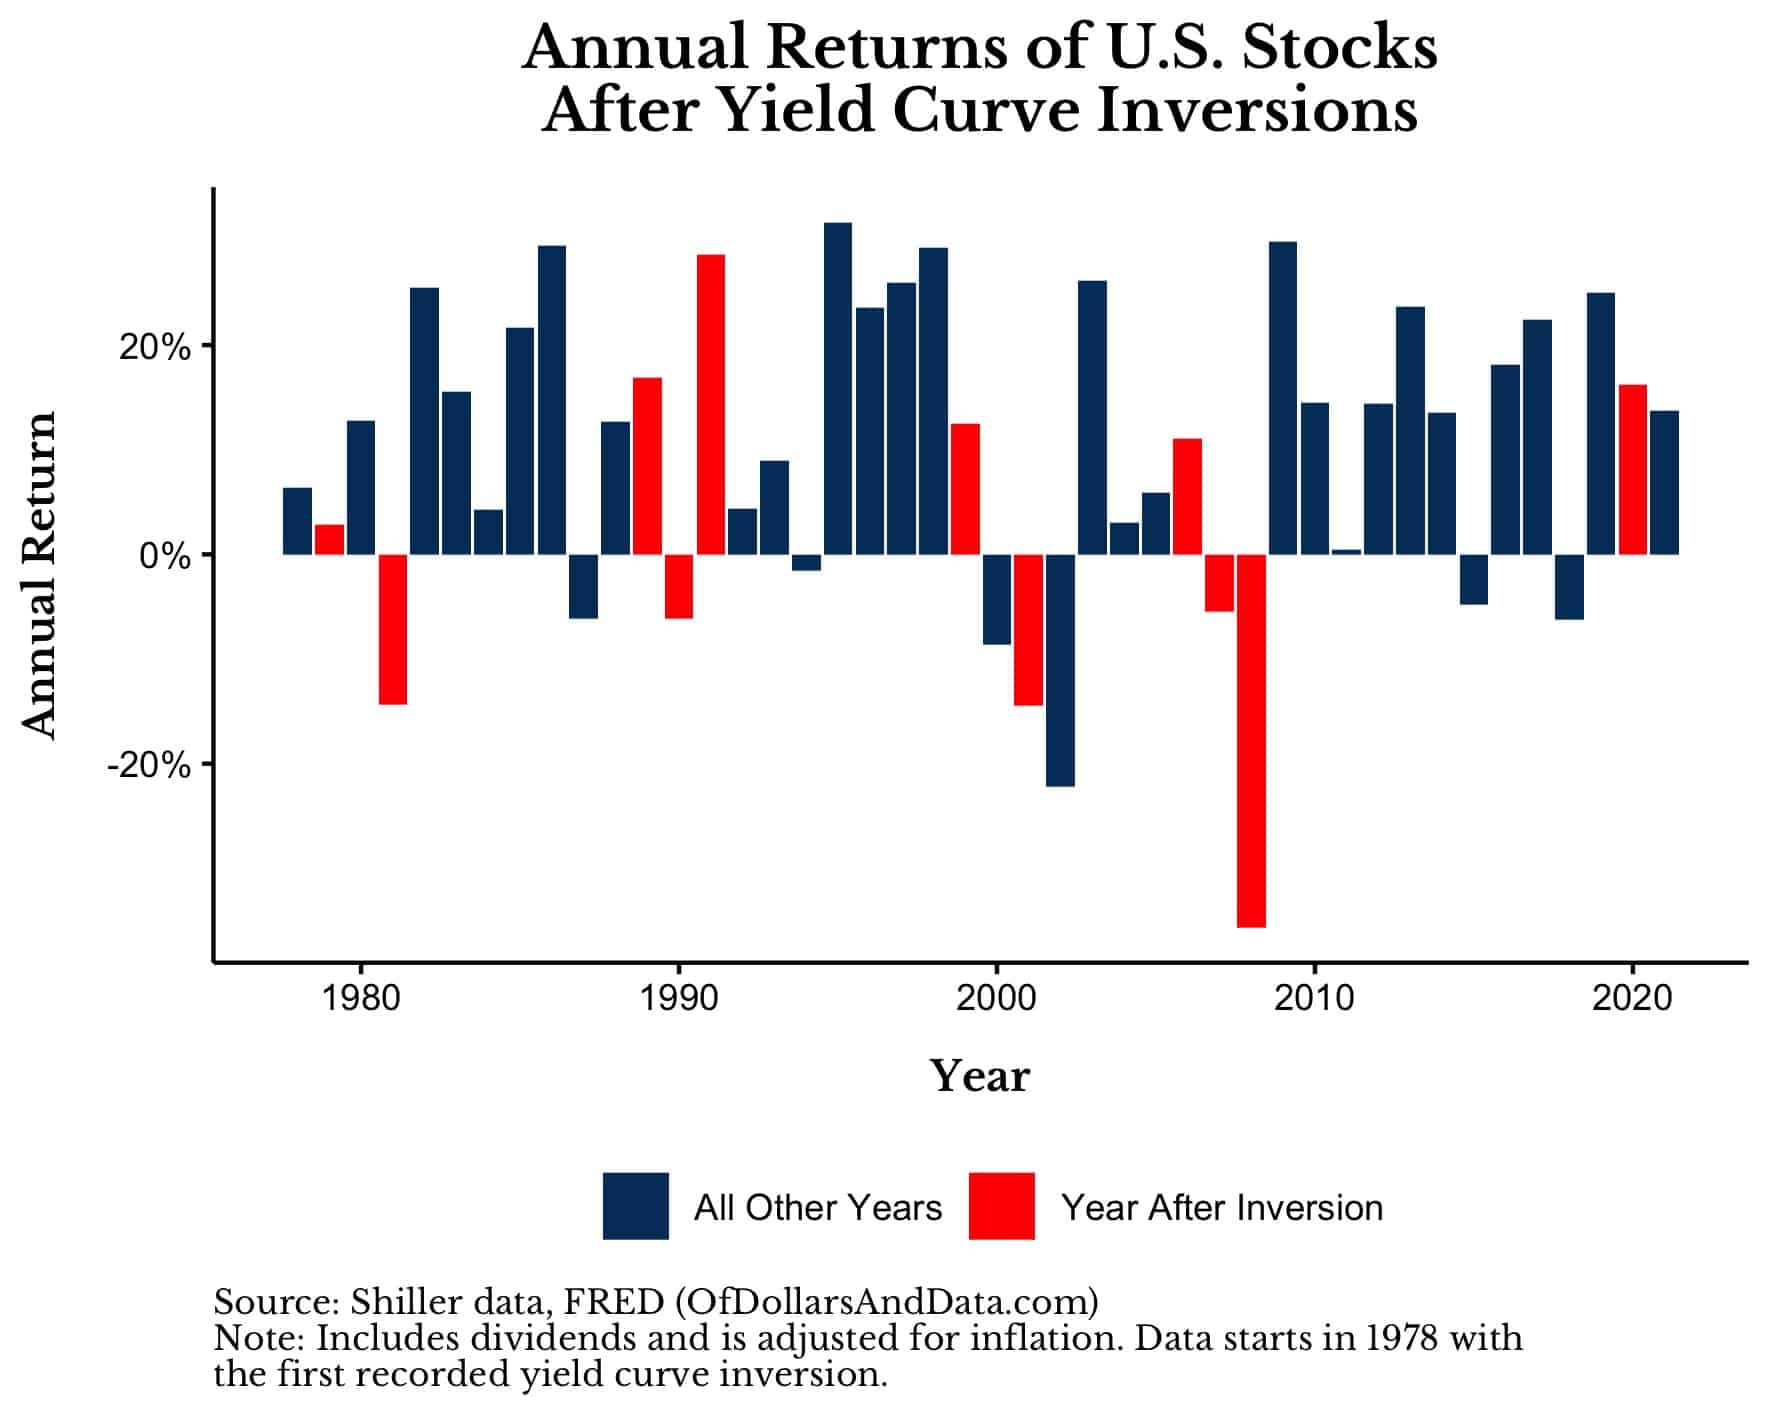 Annual returns of U.S. stocks after yield curve inversions since 1978